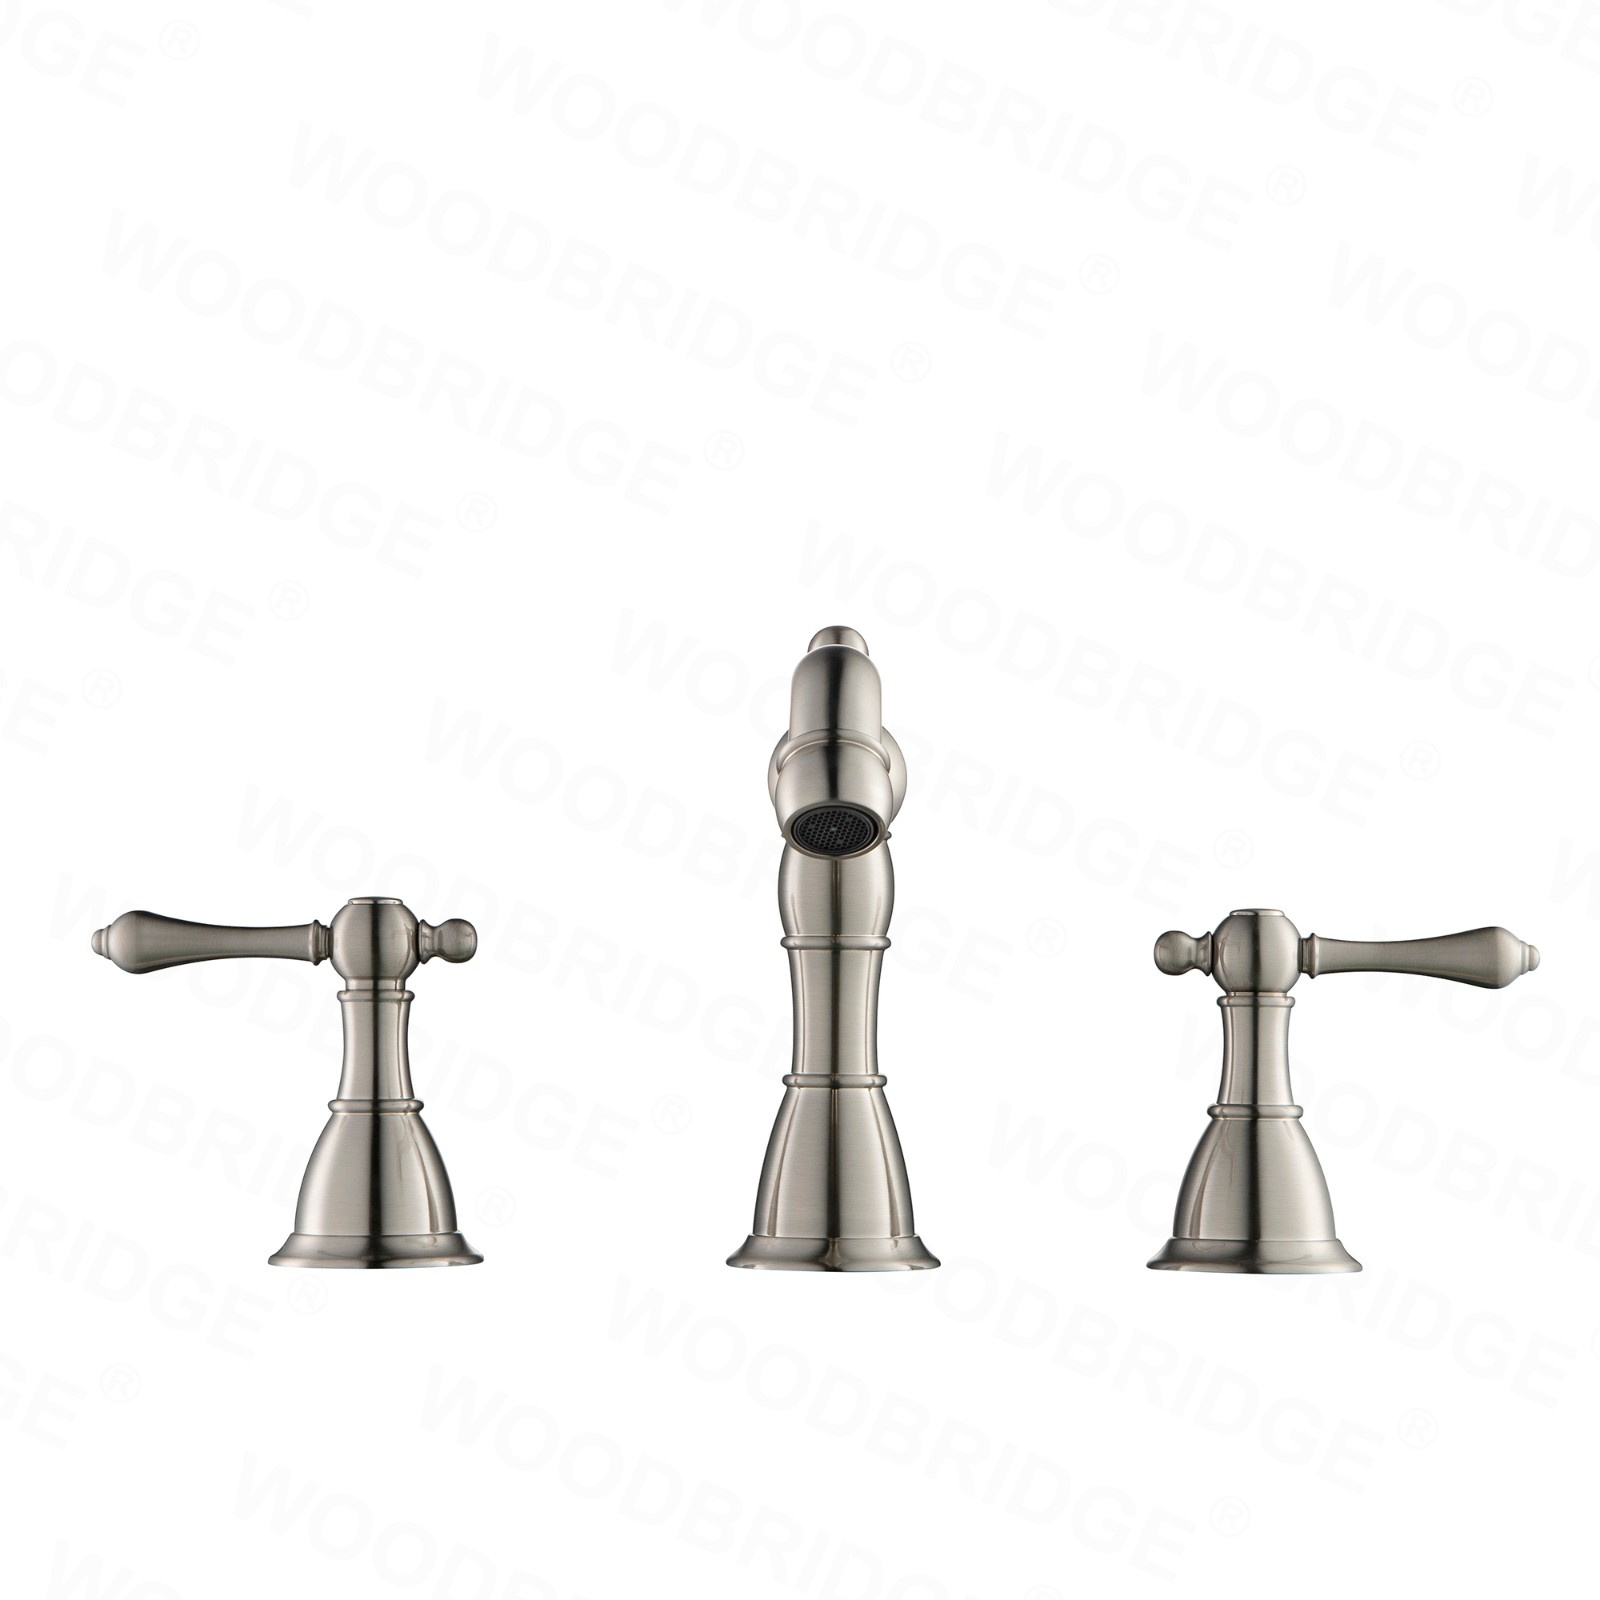  WOODBRIDGE WB802005BN 8-inch 3-hole Widespread Lavatory Faucet with Two Metal Lever Handle, Brushed Nickel_6342